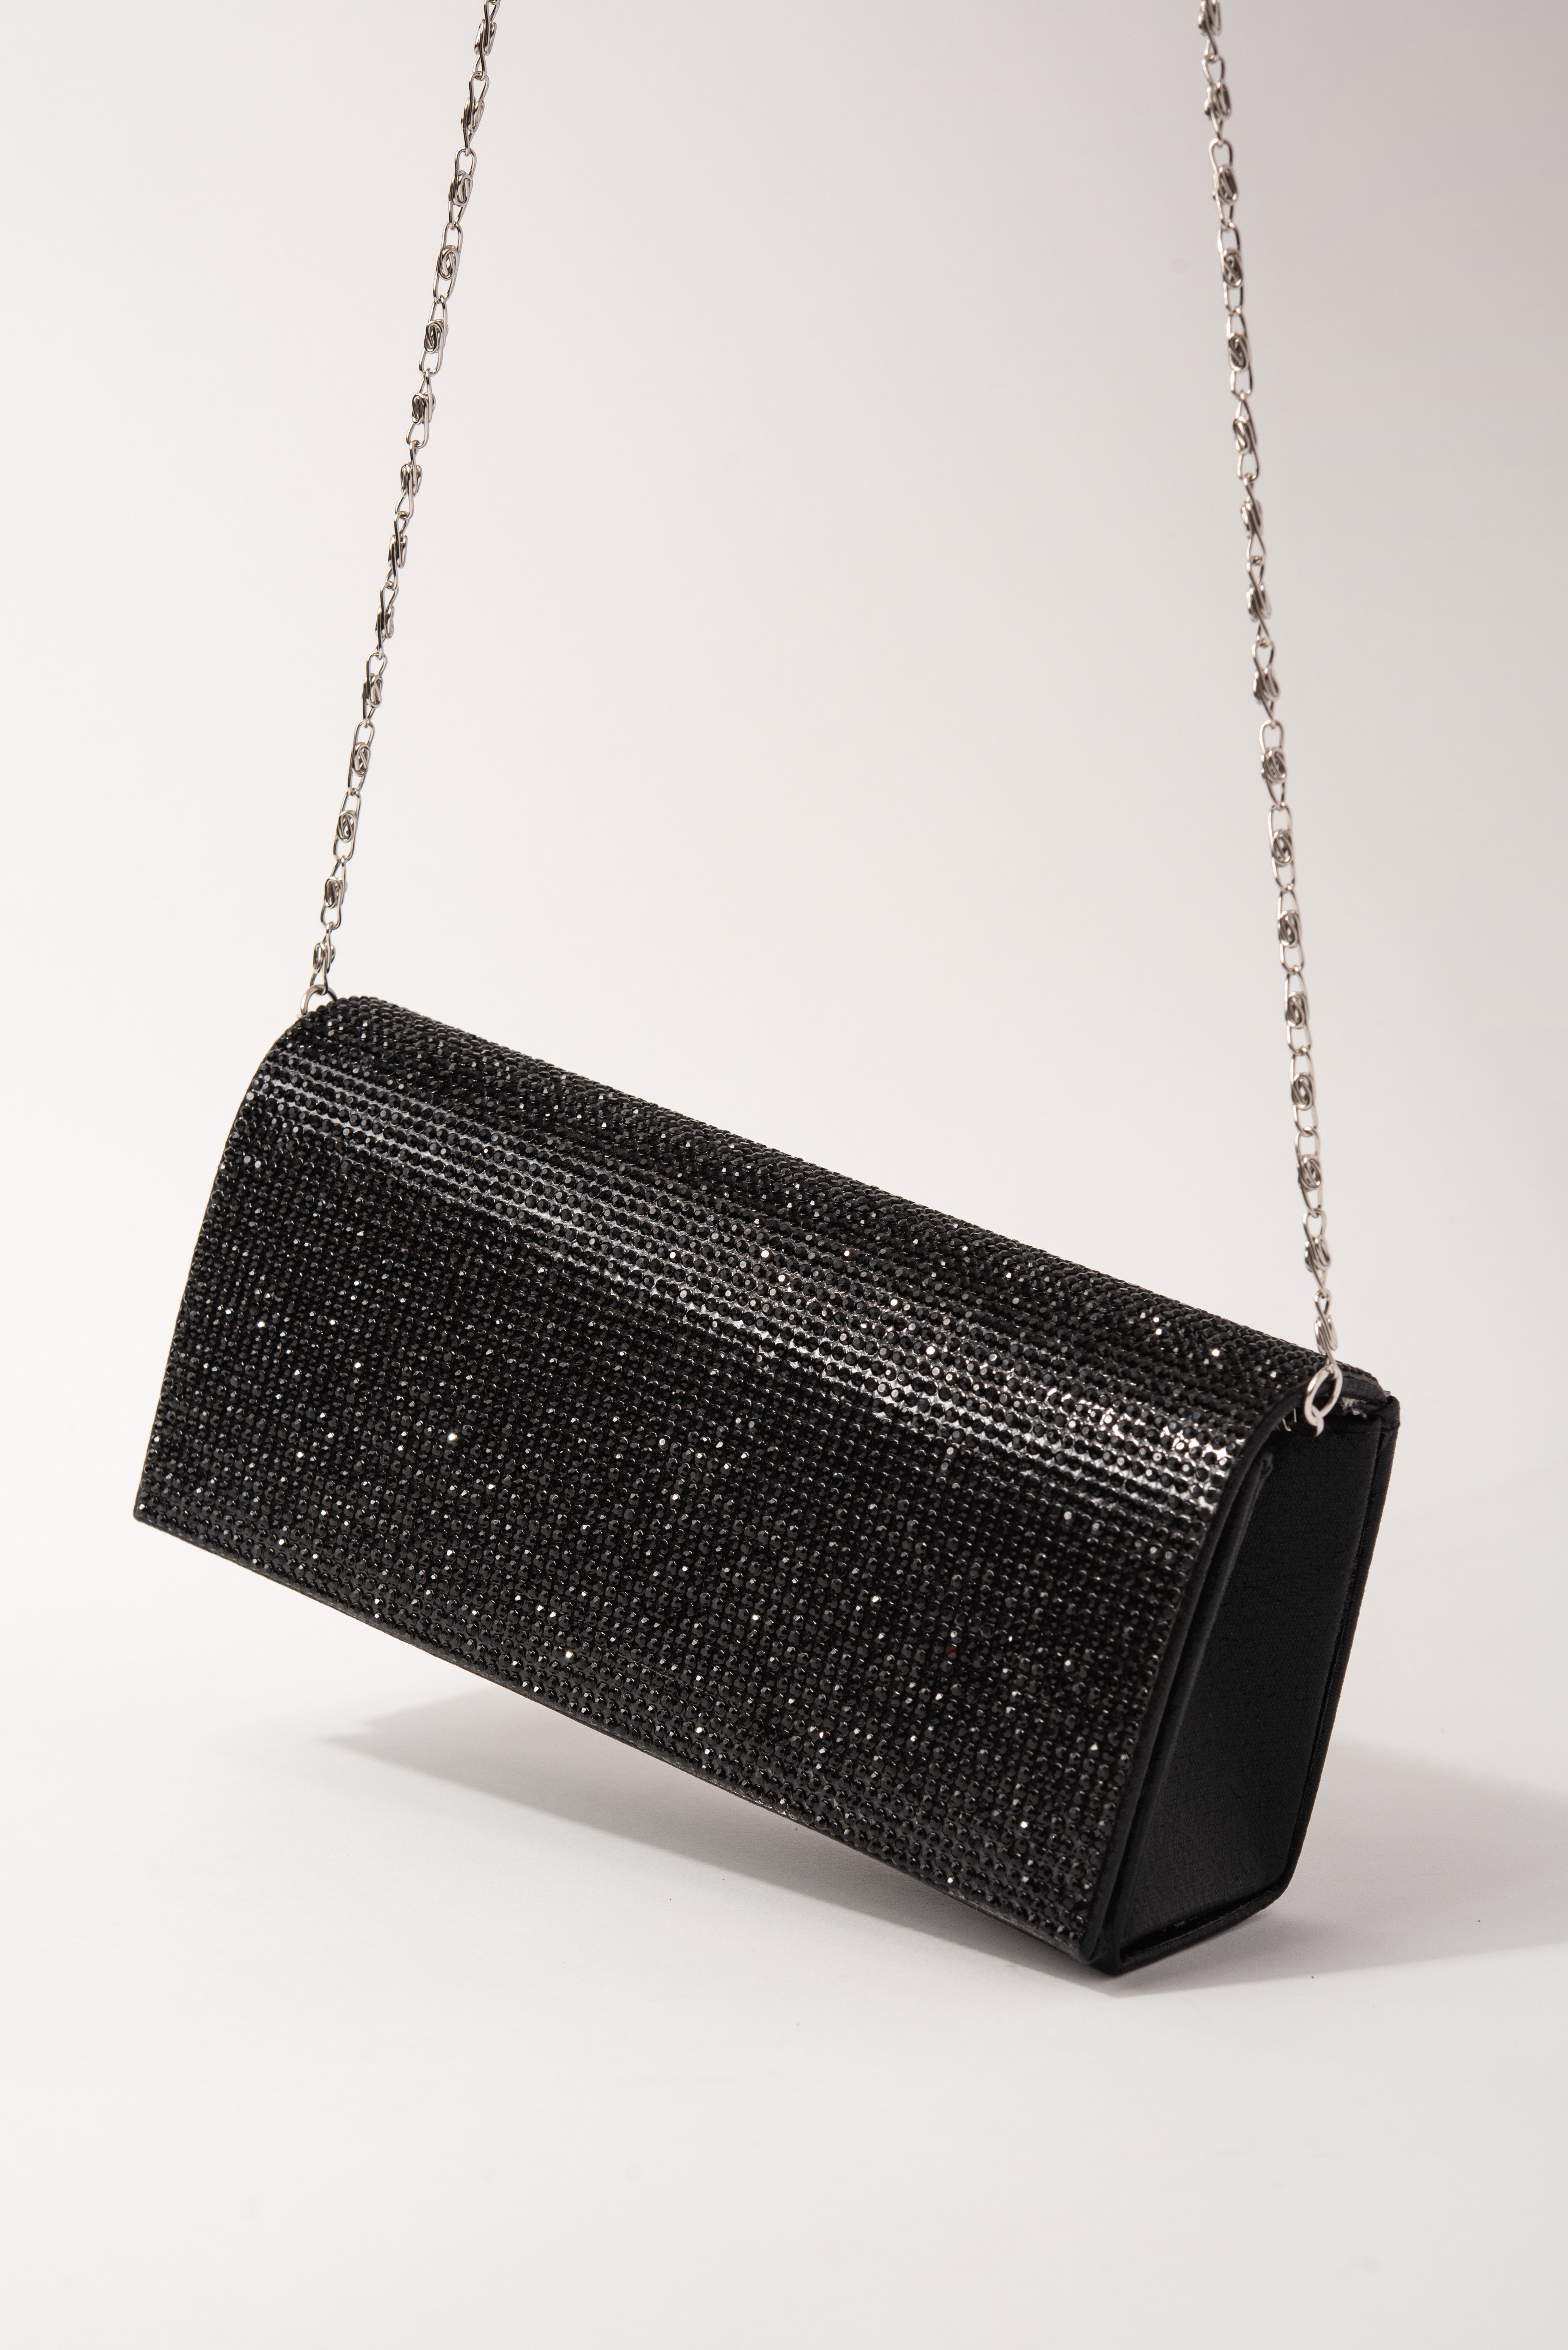 Chain Pouch in Black Leather | Clutch | Victoria Beckham UK